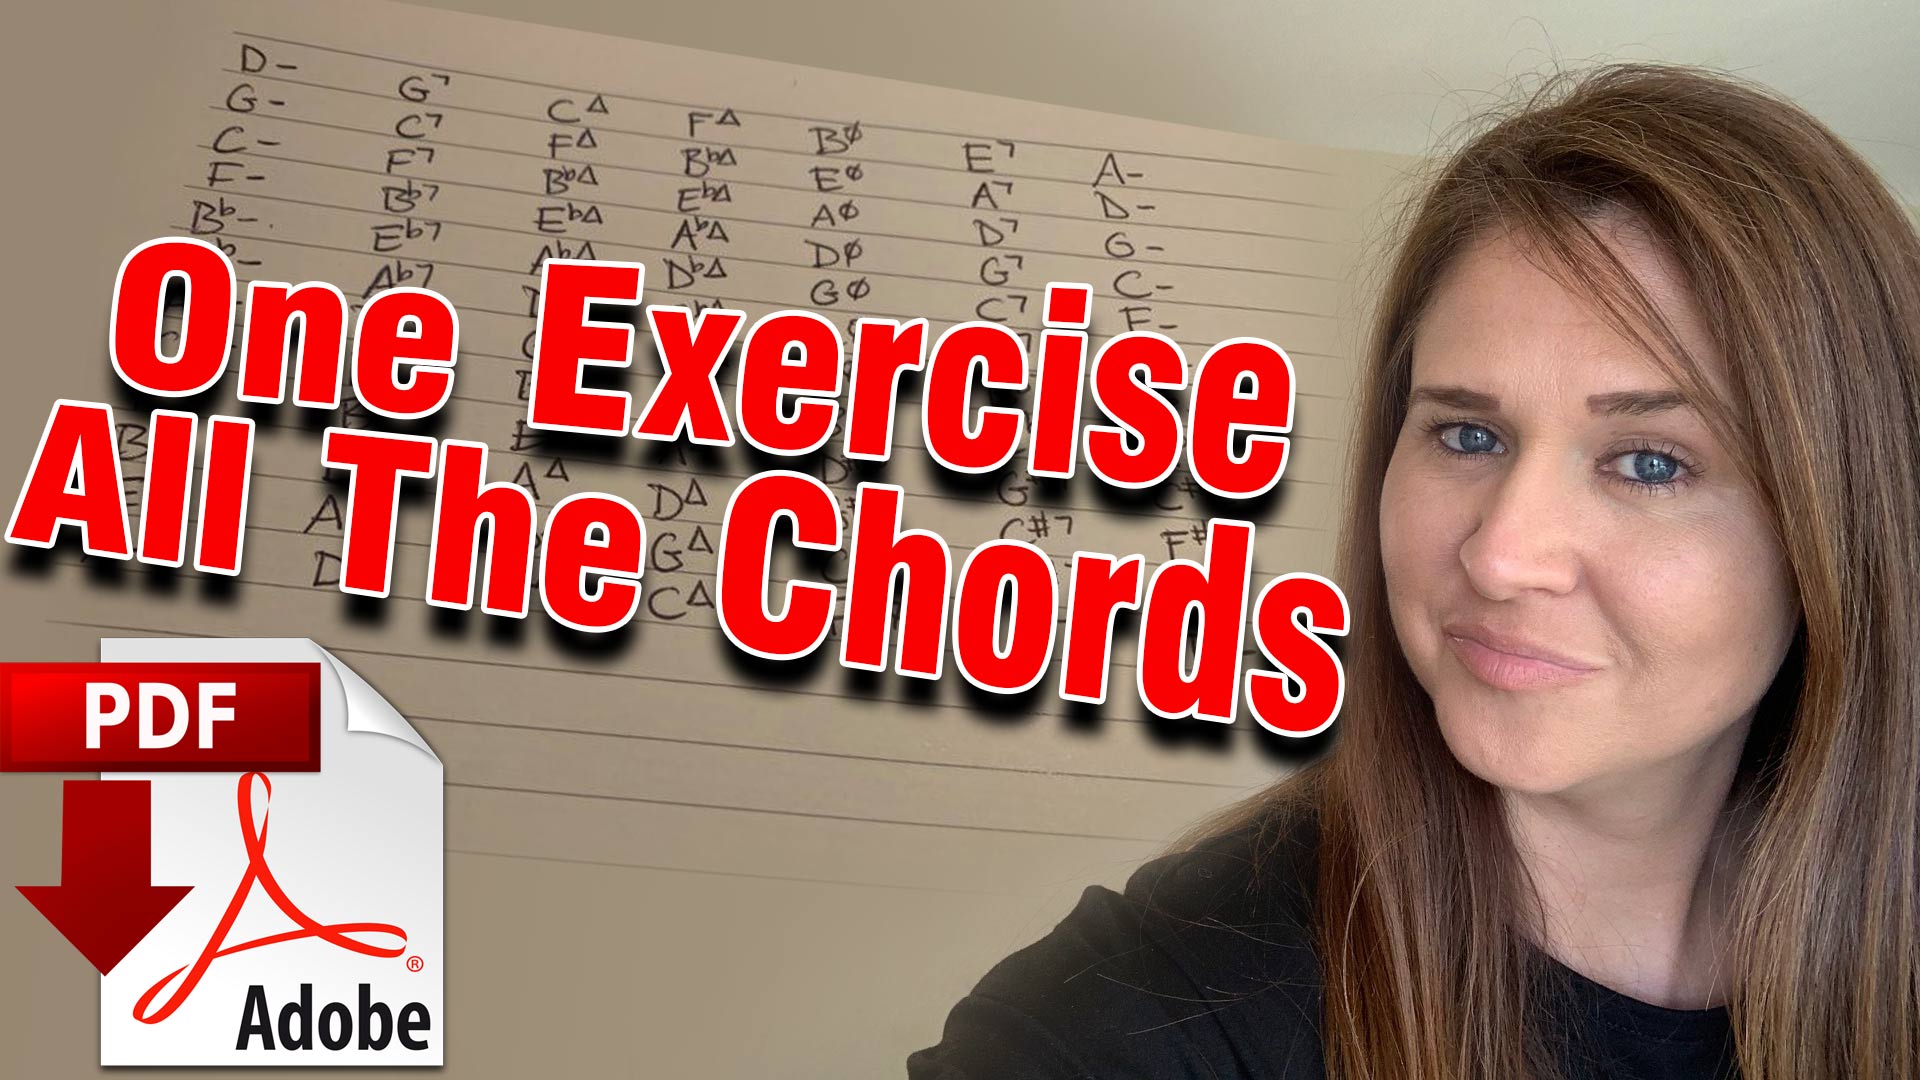 One Exercise - All The Chords